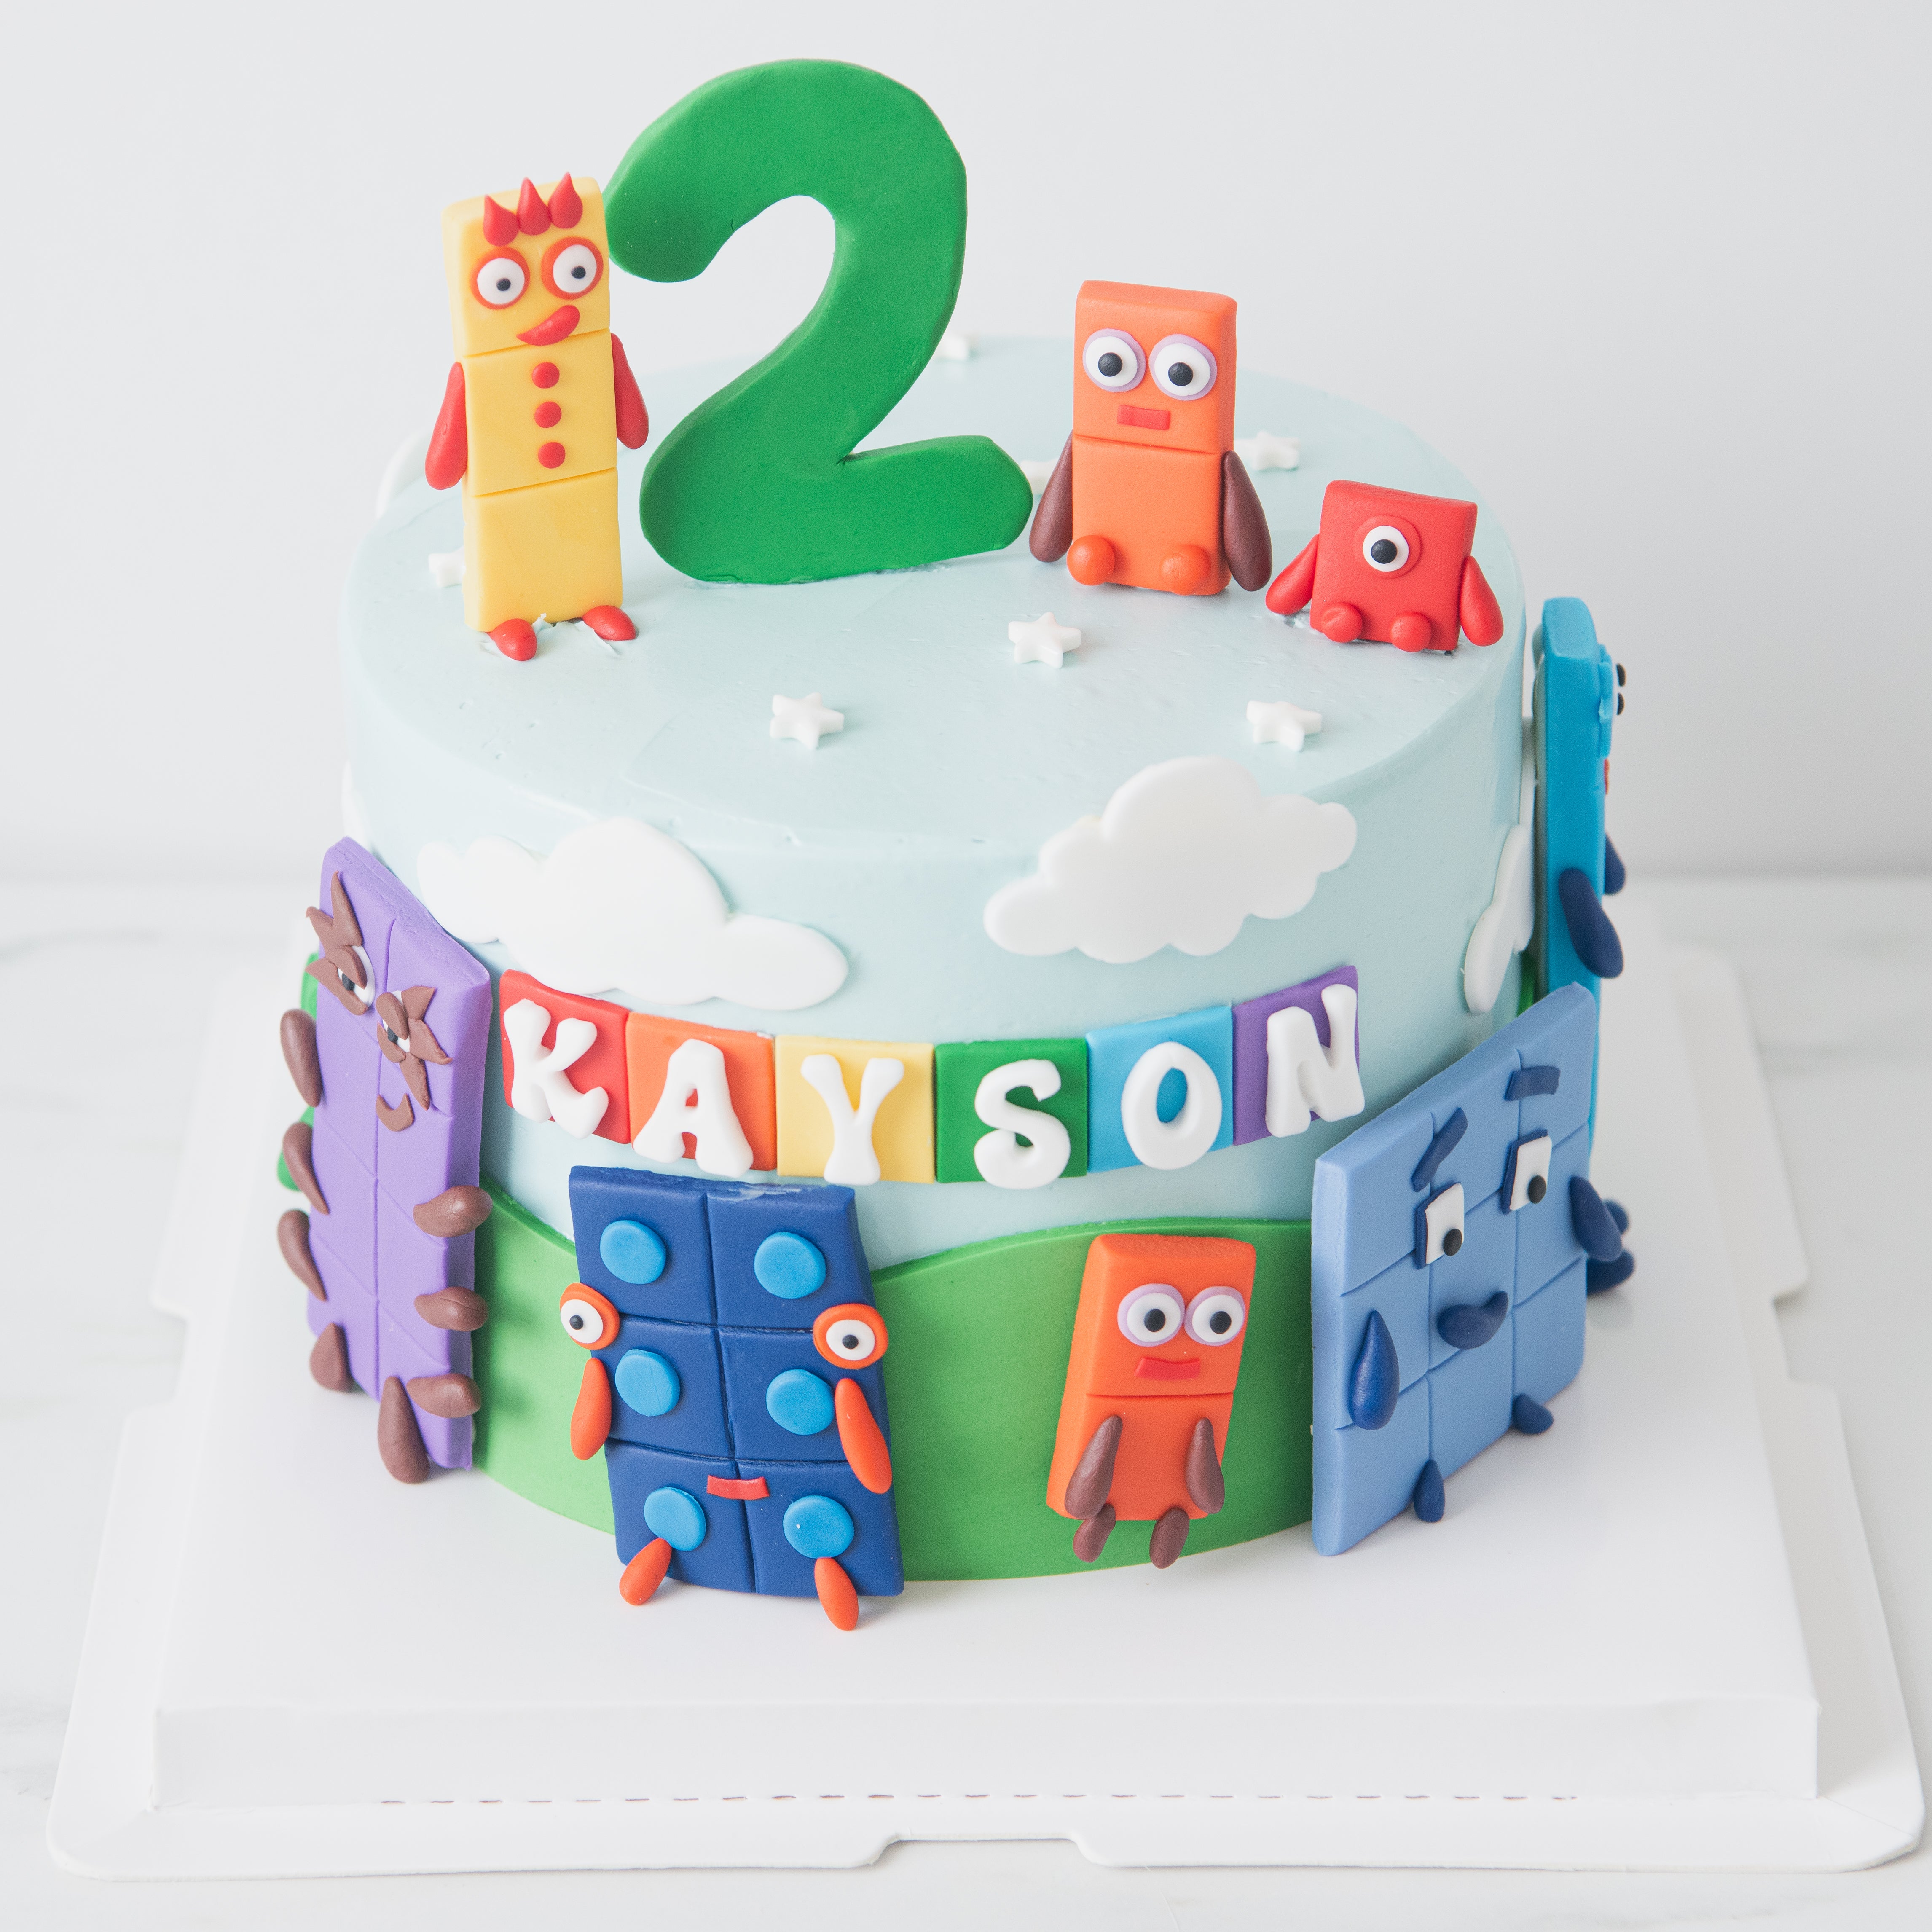 How to make a Numberblocks cake // A step by step guide - Toby Goes Bananas